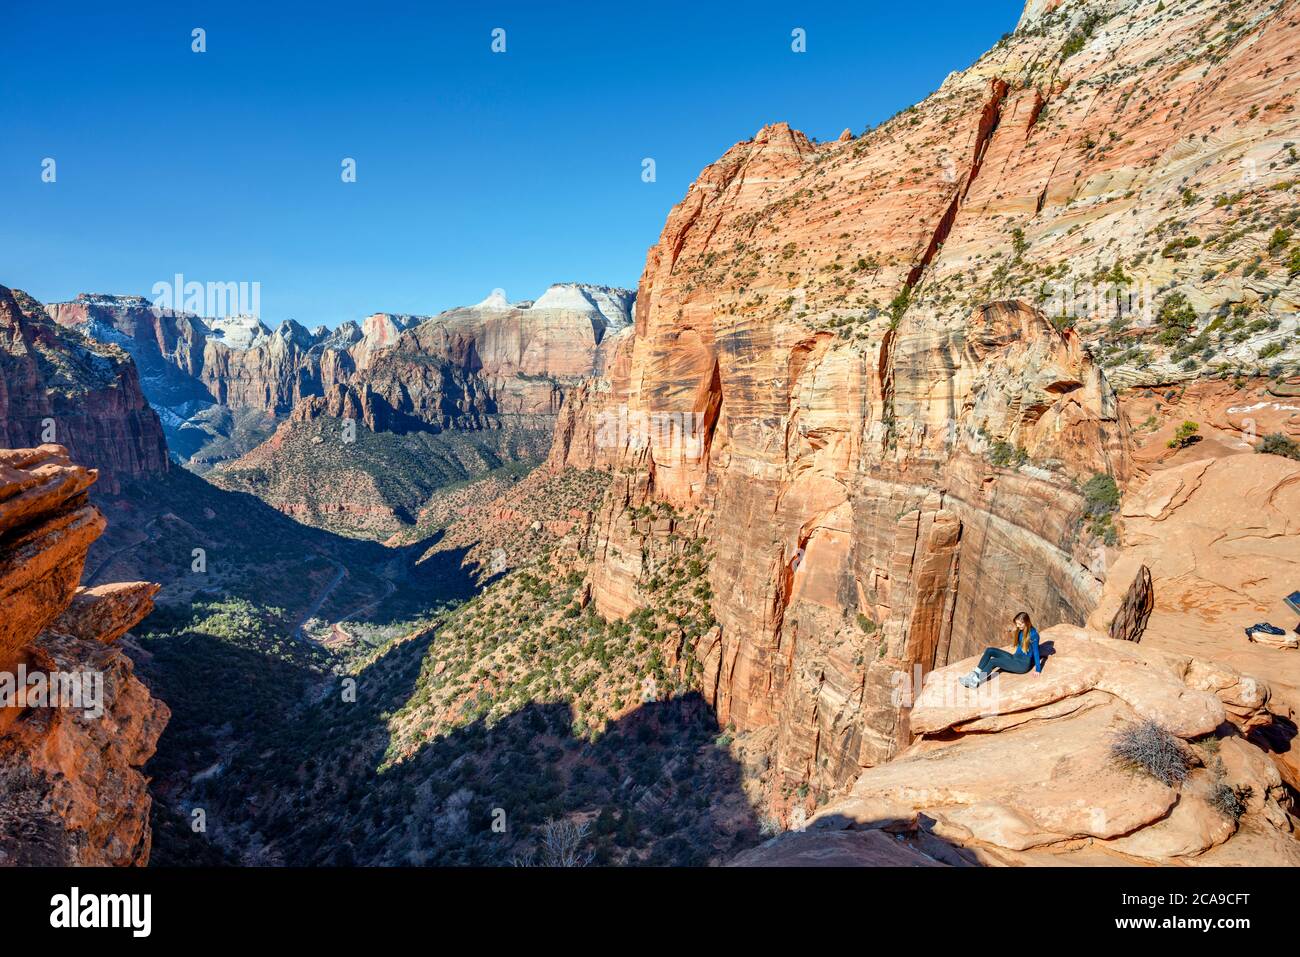 Young woman sitting on a rock at Canyon Overlook, Zion Canyon, Zion National Park, Utah, USA Stock Photo